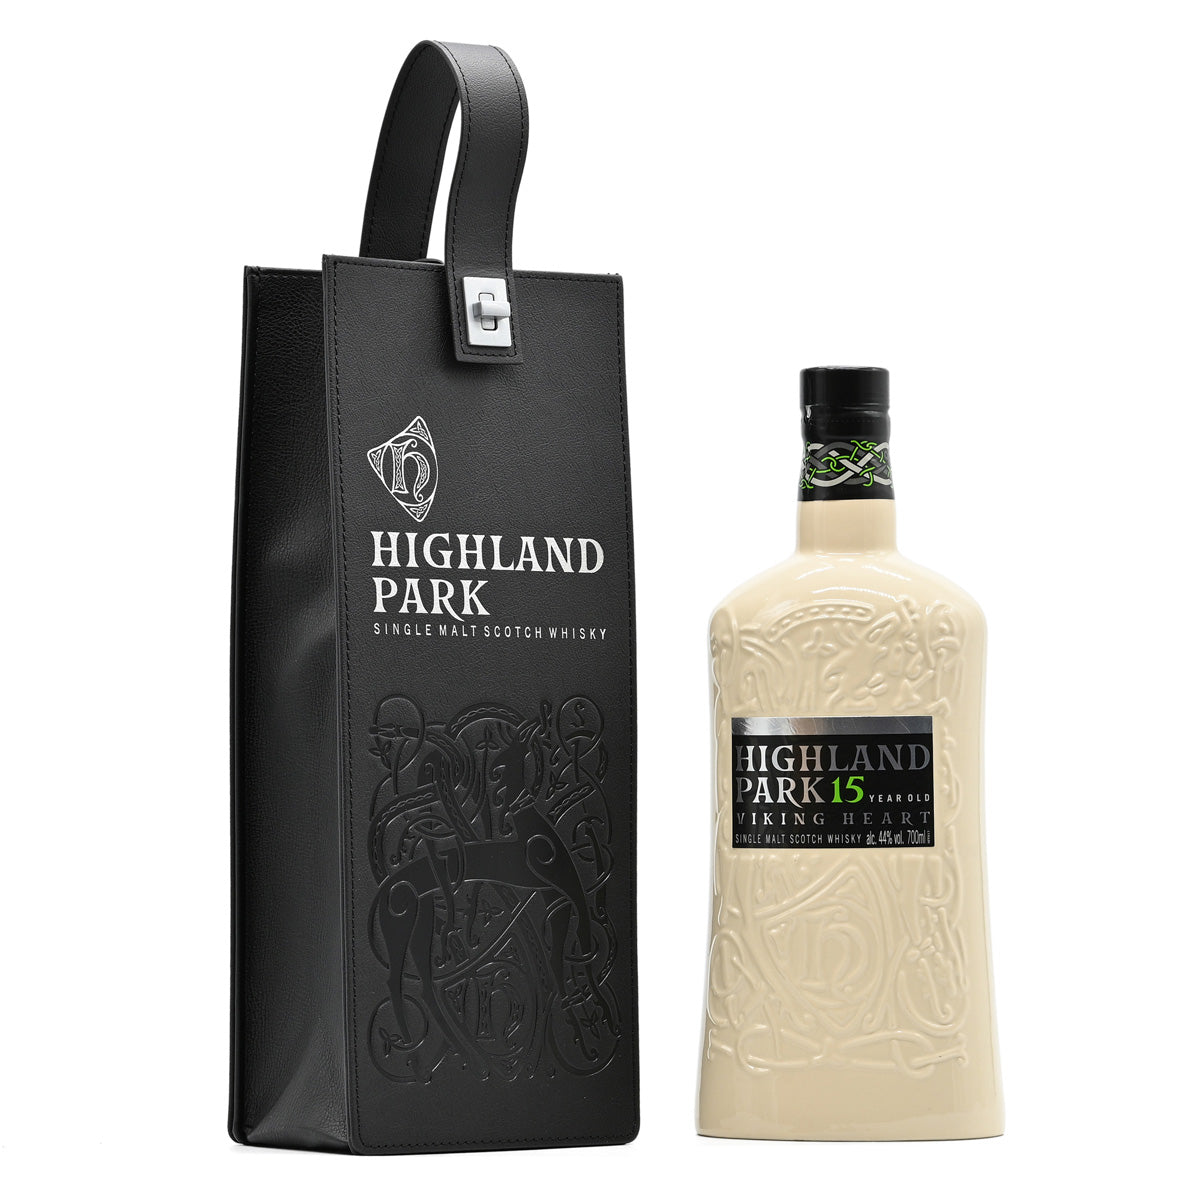 Highland Park 15 years single malt Scotch whisky, with special gift bag, from Kirkwall, Orkney, Scotland – GDV Fine Wines, Hong Kong